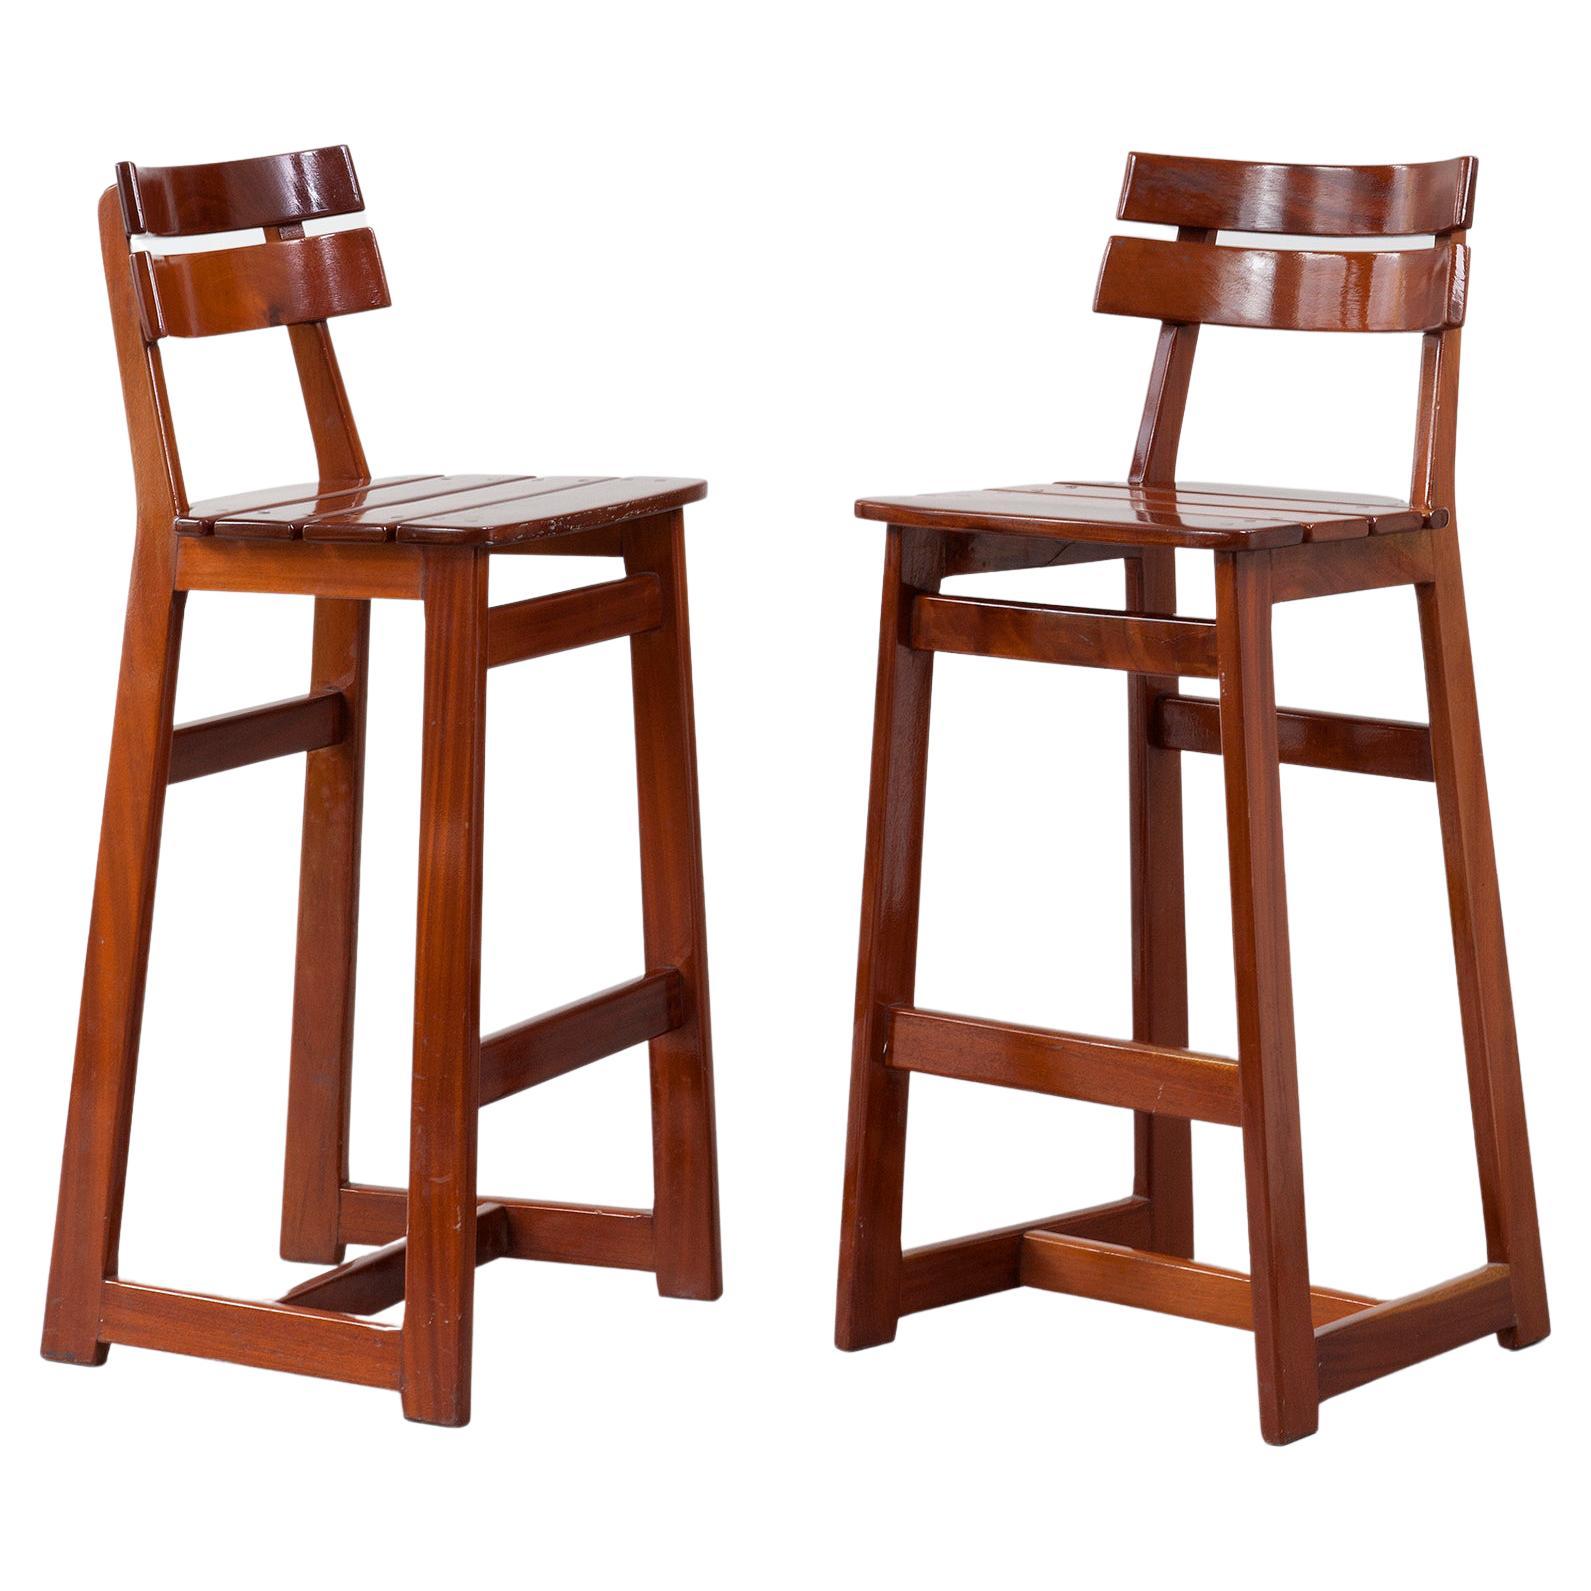 Pair of Barstools in Brazilian Mahogany by Sérgio Rodrigues